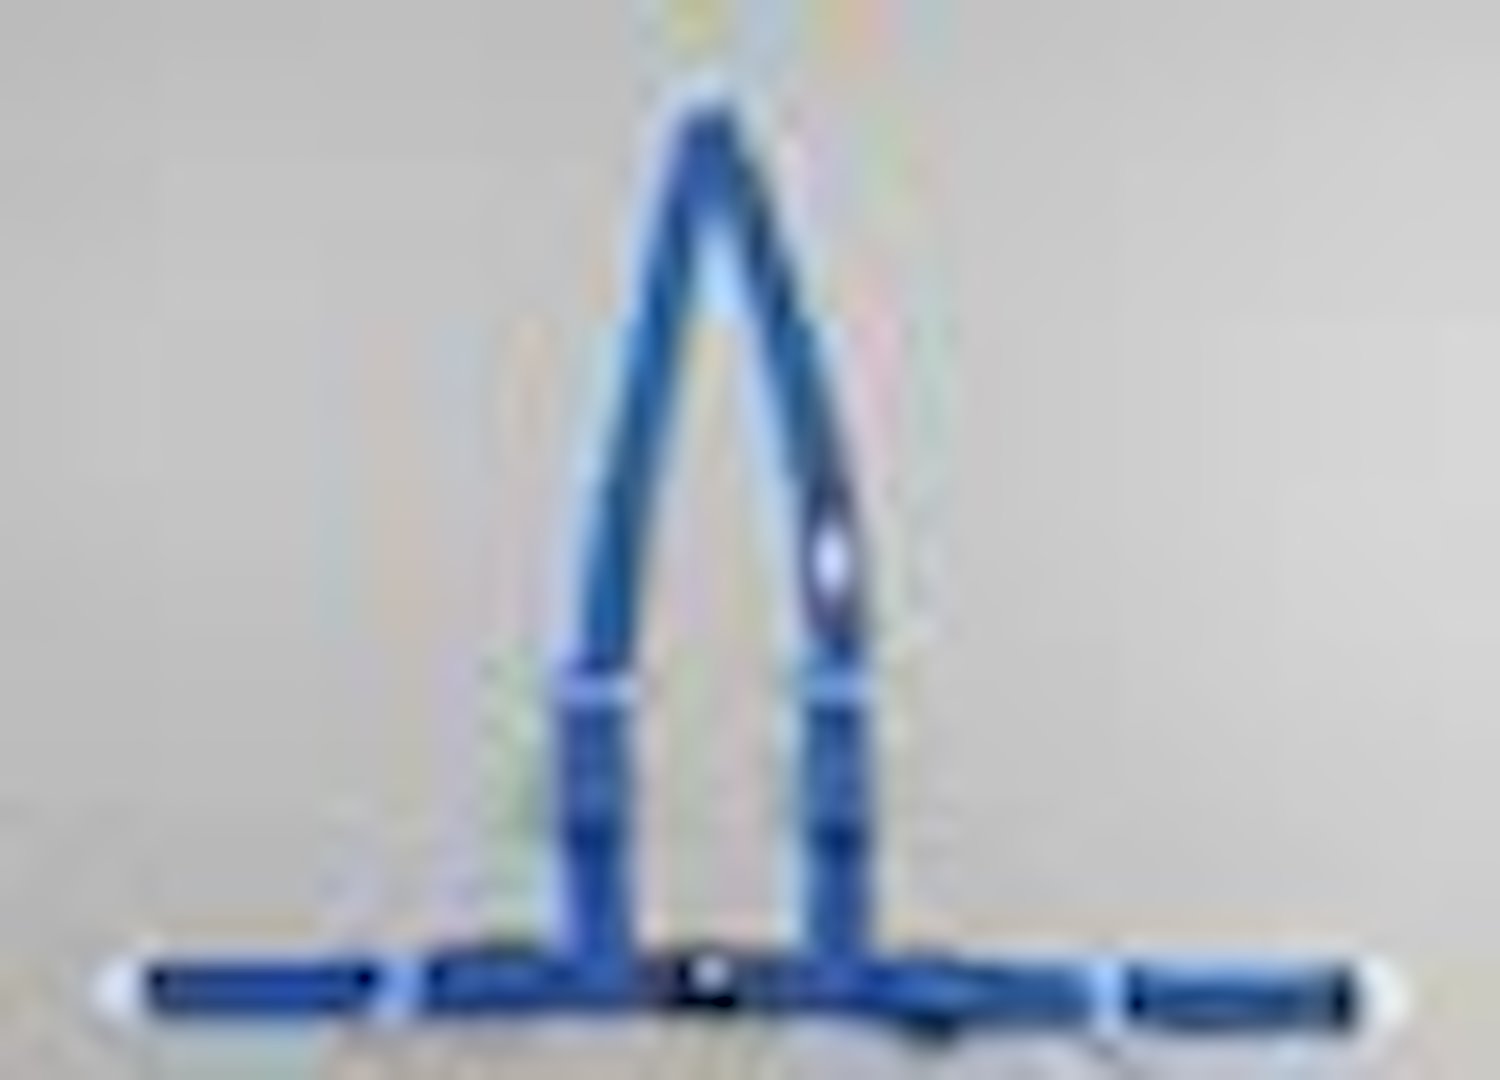 NON-SFI B&T HARNESS 2 PULL UP Lap Belt 2 S.H. INDIVIDUAL FLOOR Mount ALL WRAP ENDS BLUE